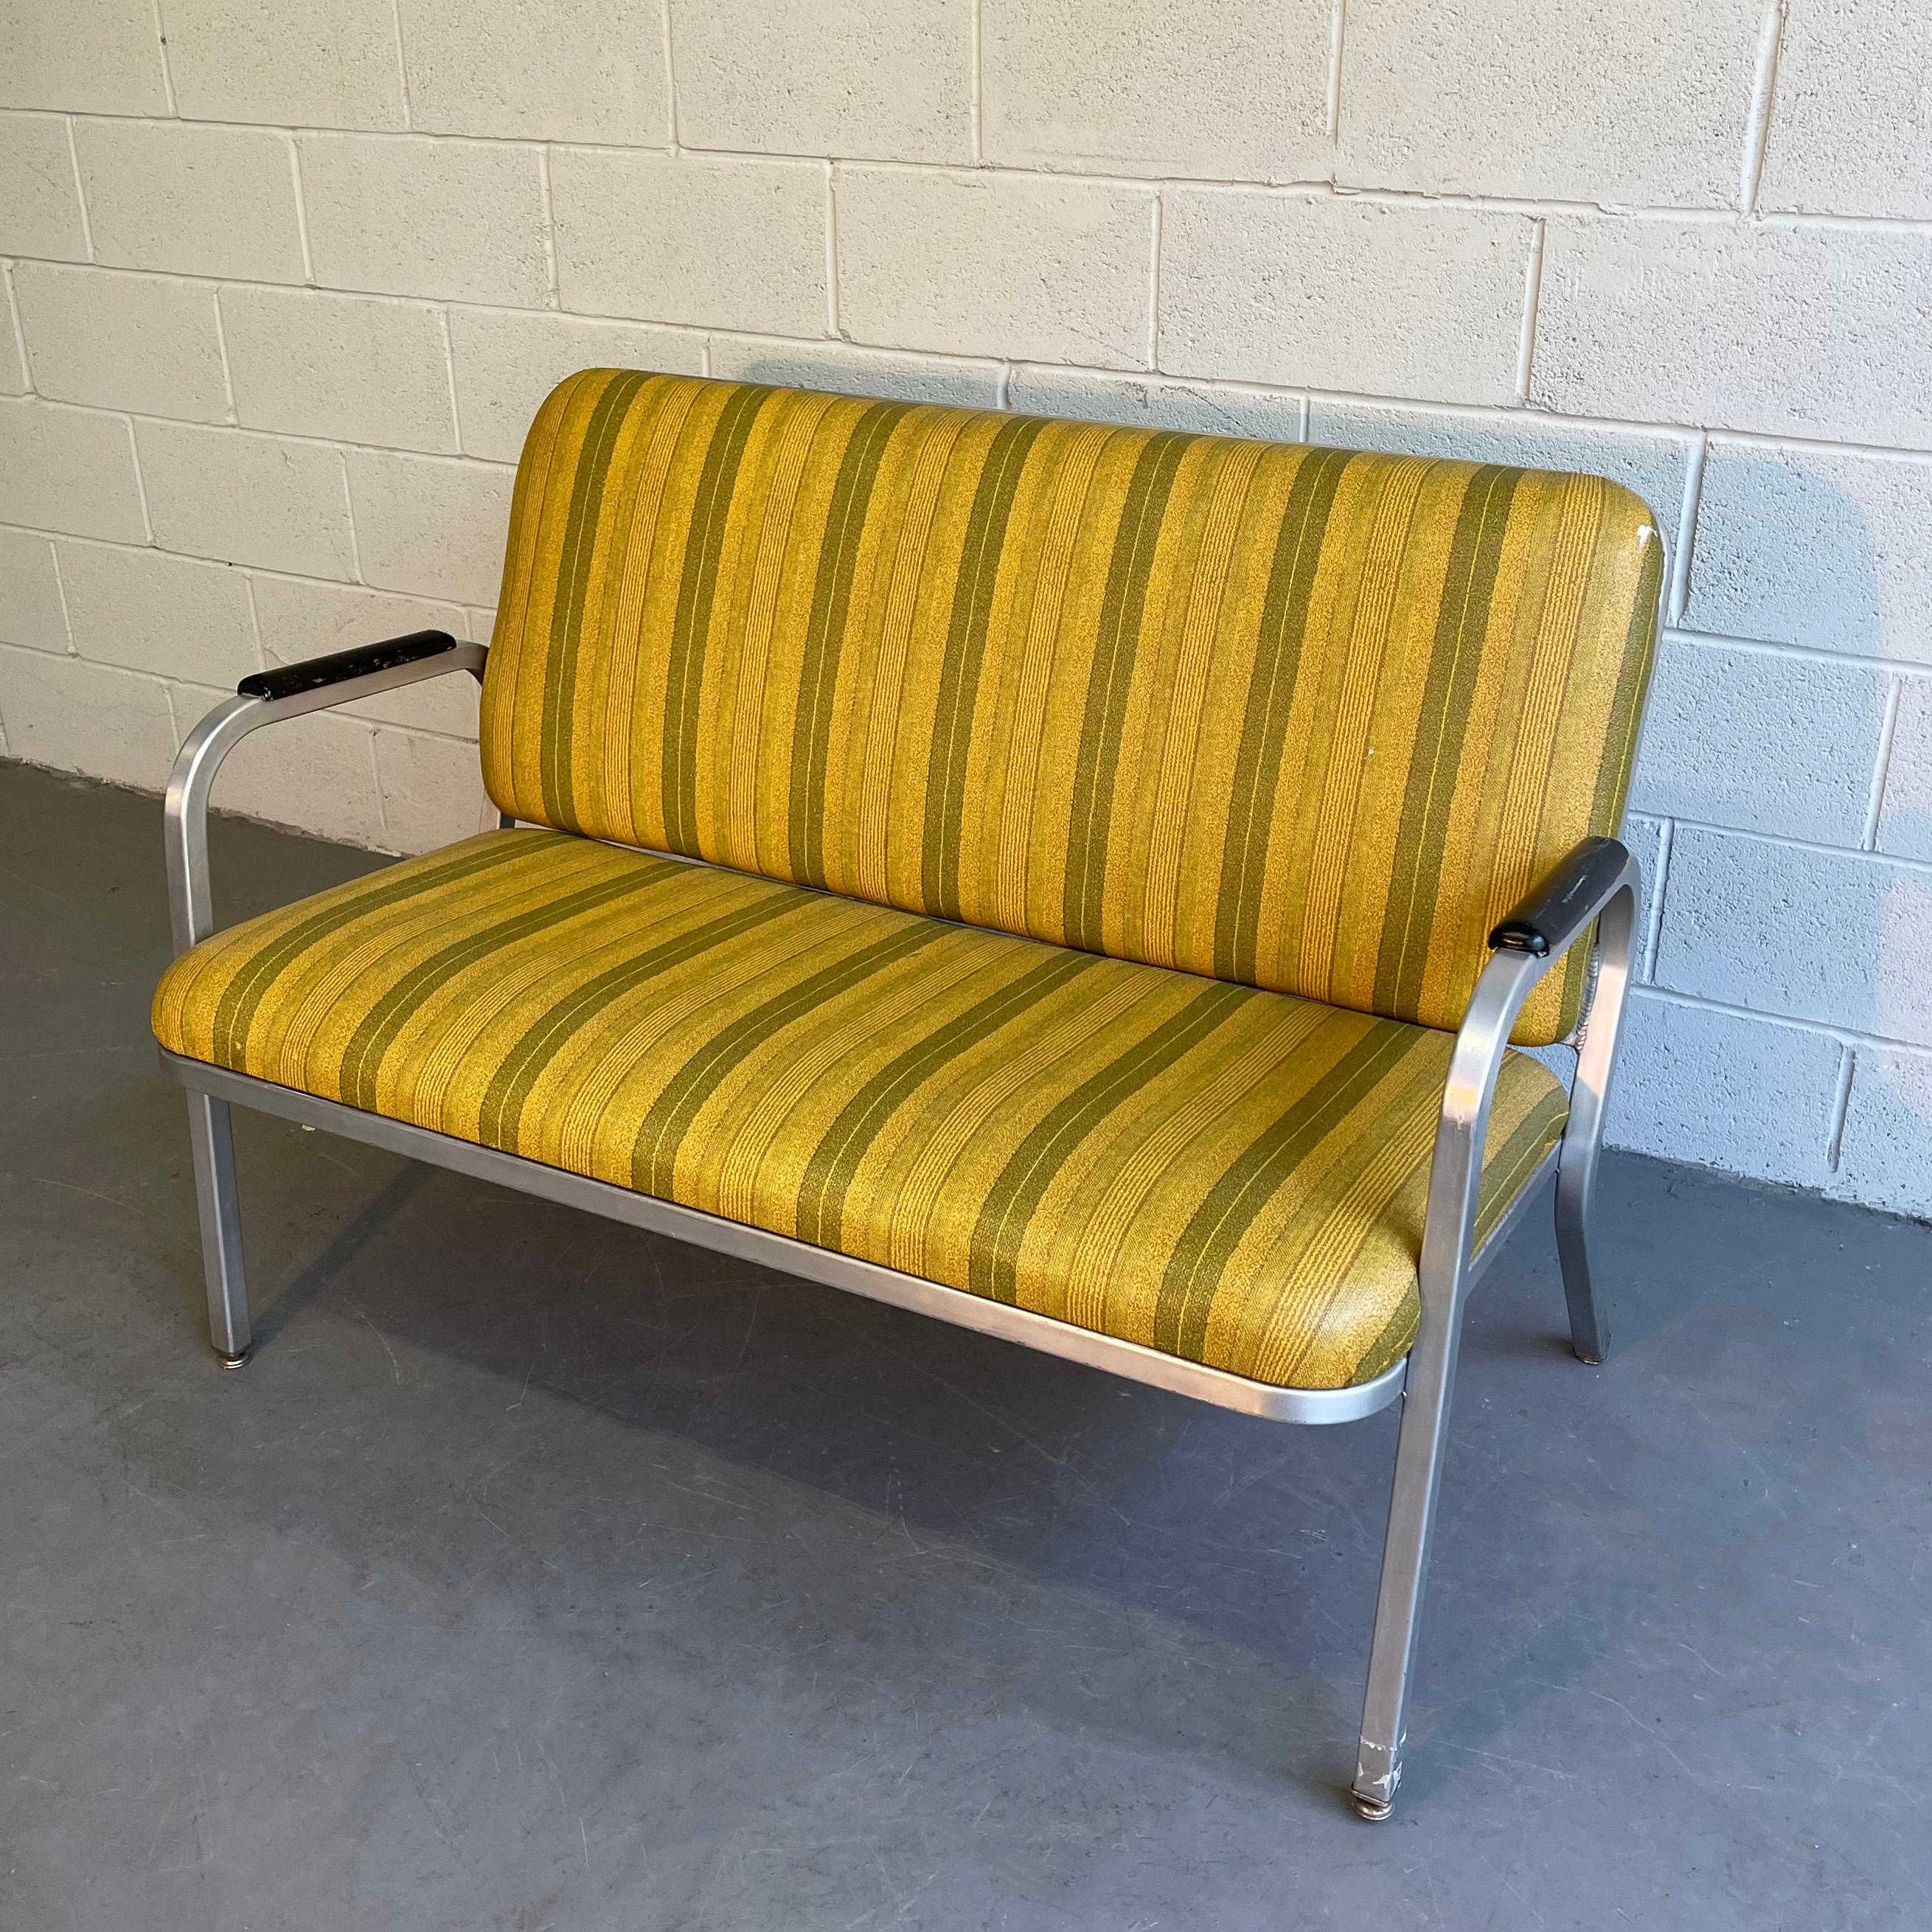 Painted Midcentury Aluminum Frame Loveseat Sofa by GoodForm For Sale